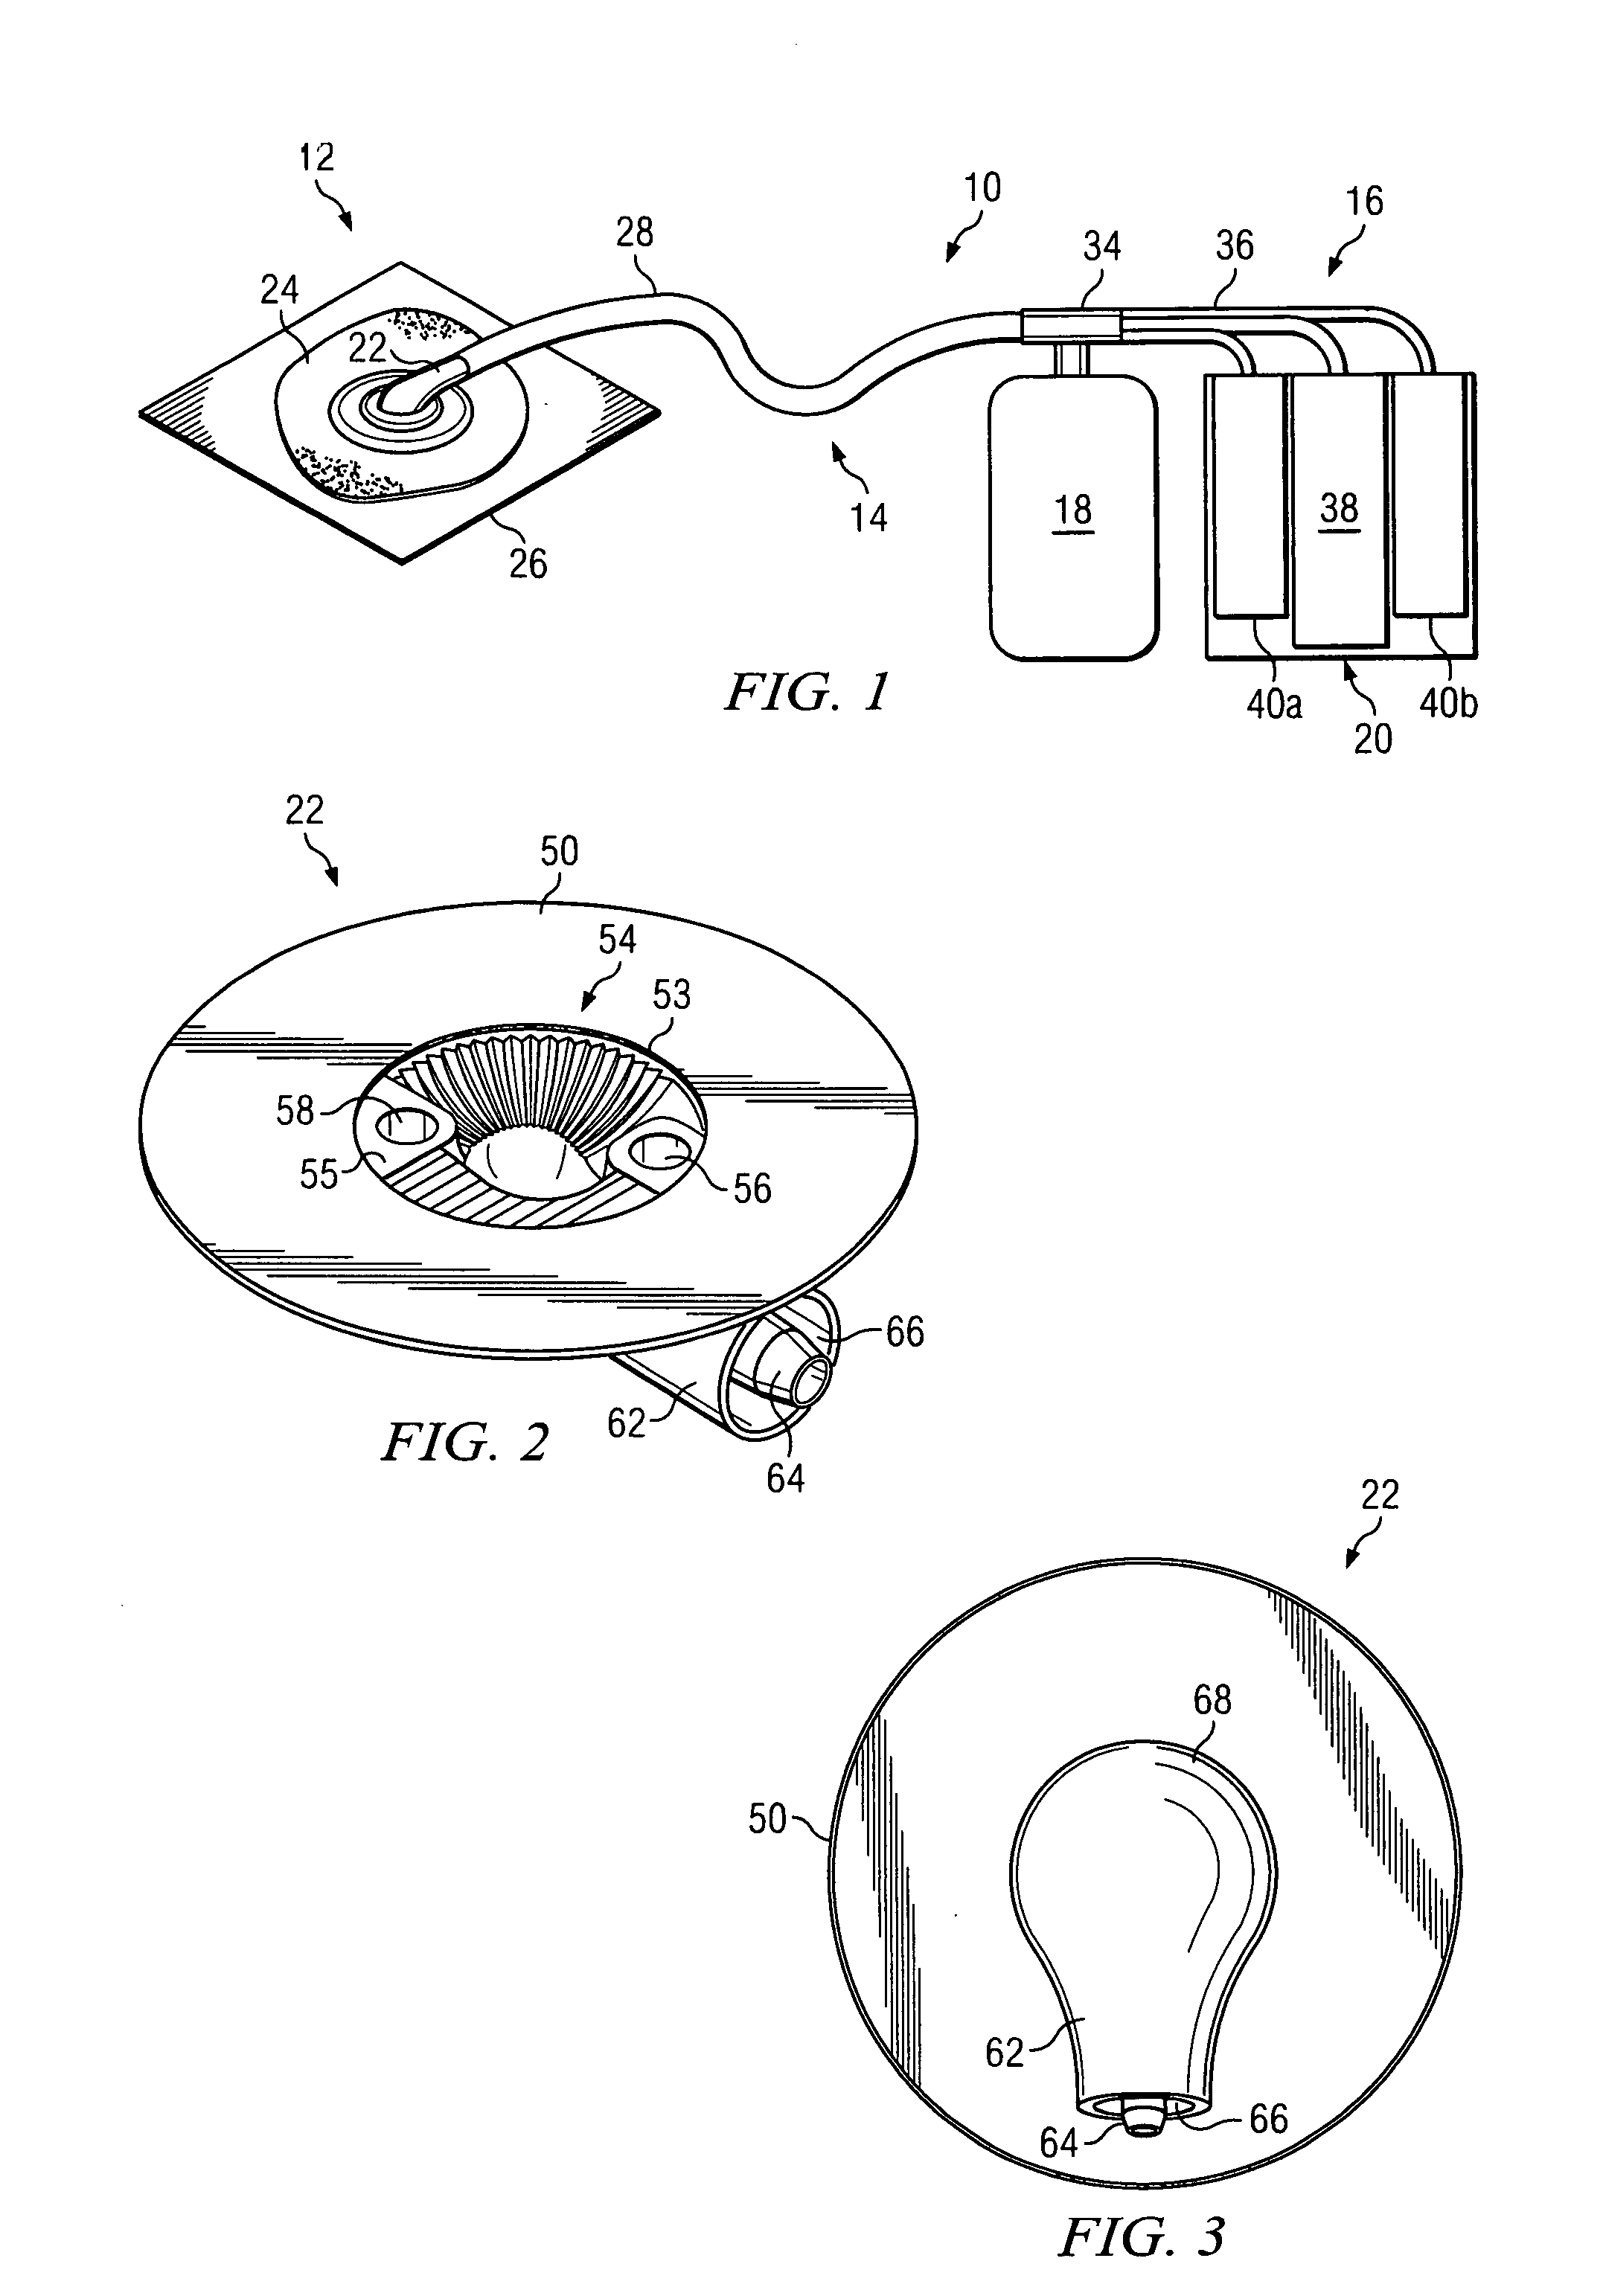 Systems and methods for improved connection to wound dressings in conjunction with reduced pressure wound treatment systems